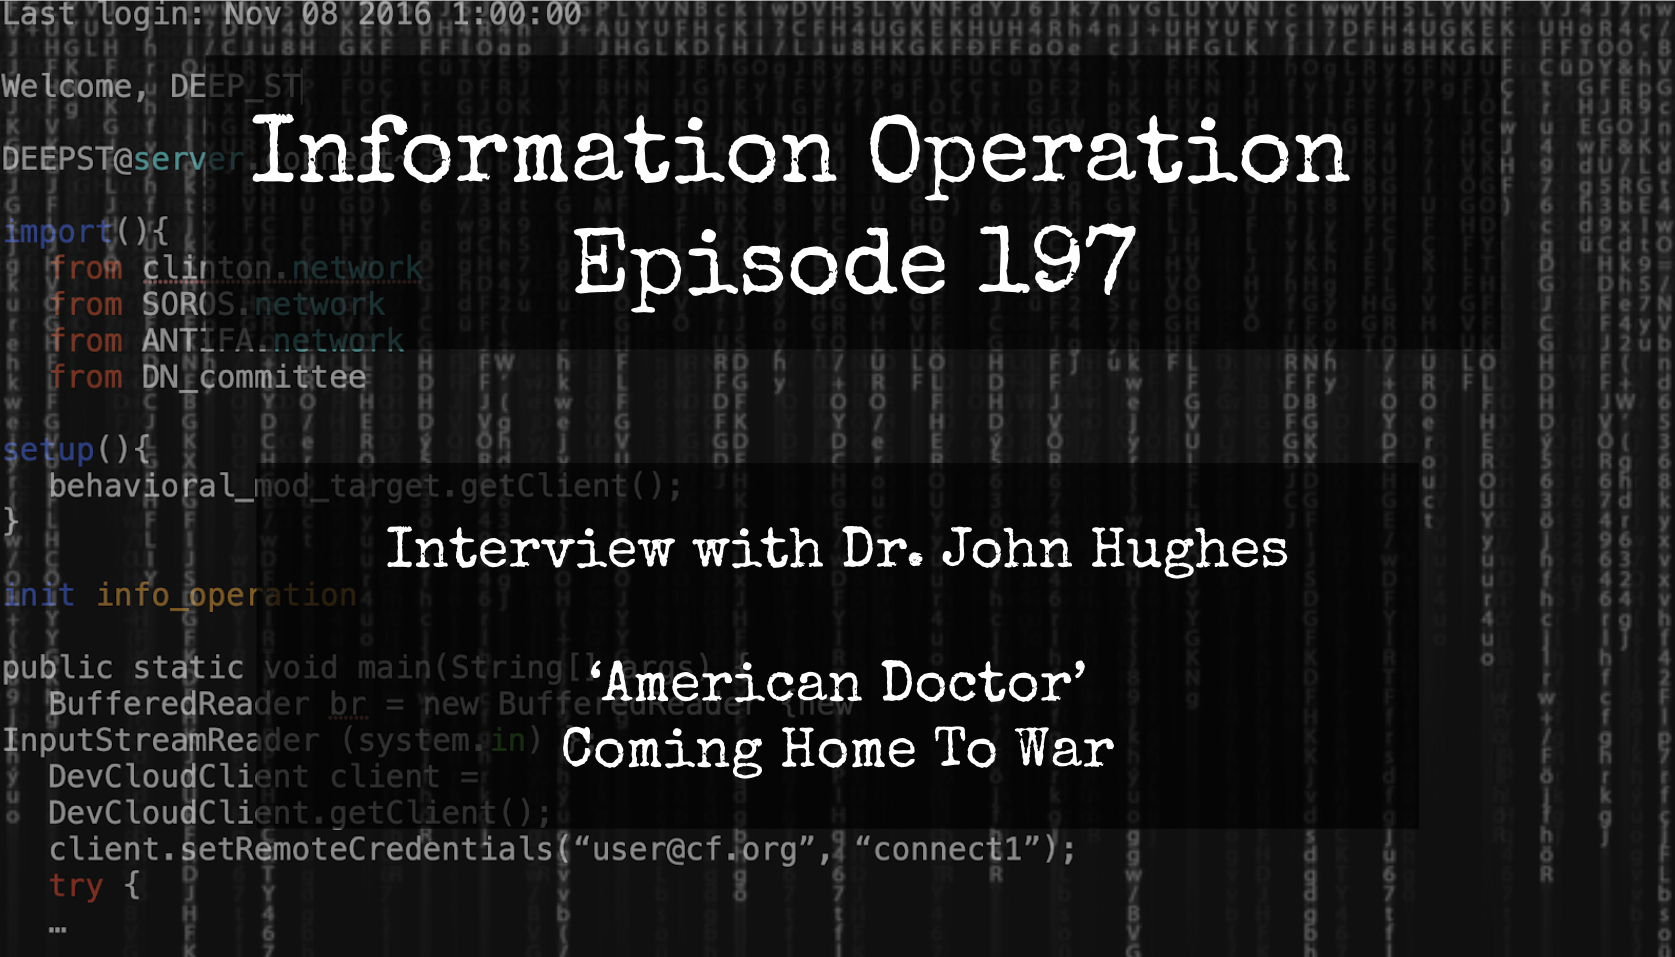 LIVE 5pm EST: Information Operation Veteran's Day Special - Dr. John Hughes Coming Home To War